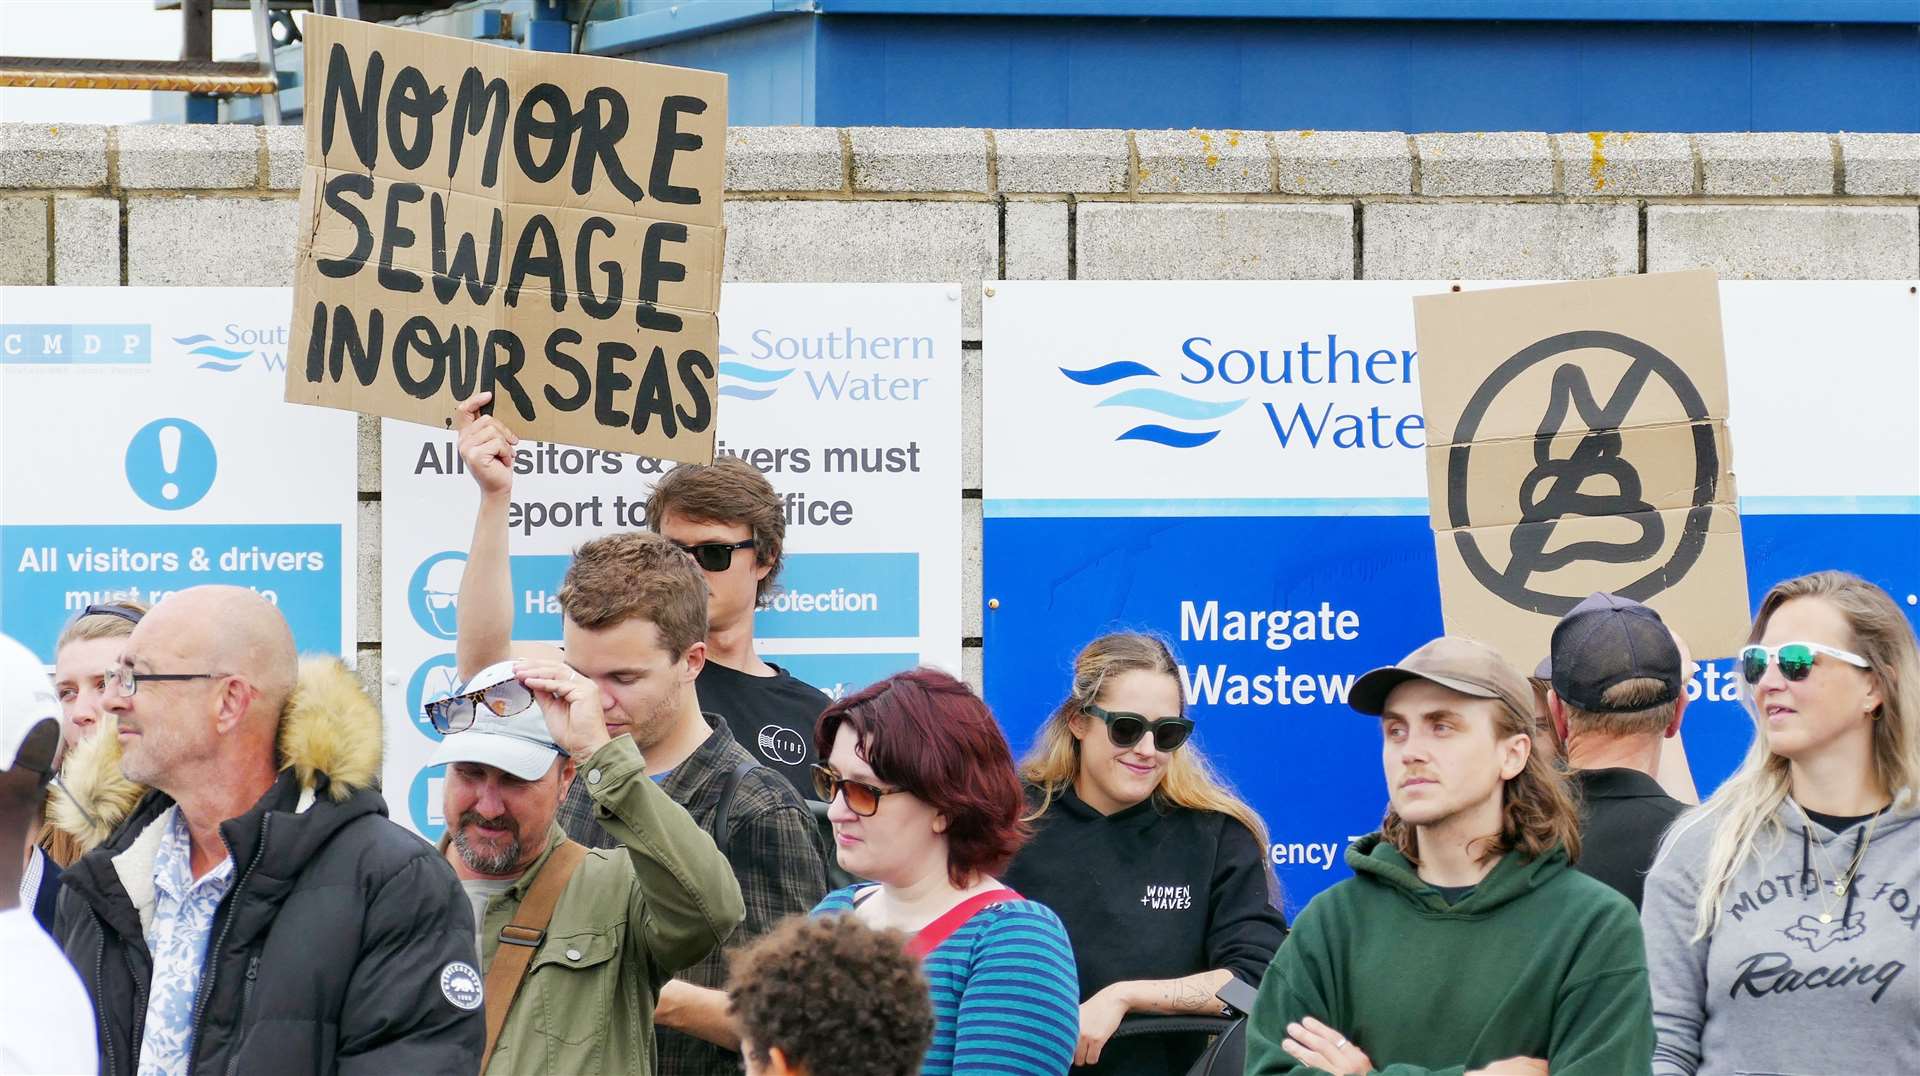 People protested against Southern Water sewage leaks in Thanet. Picture: Frank Leppard photography